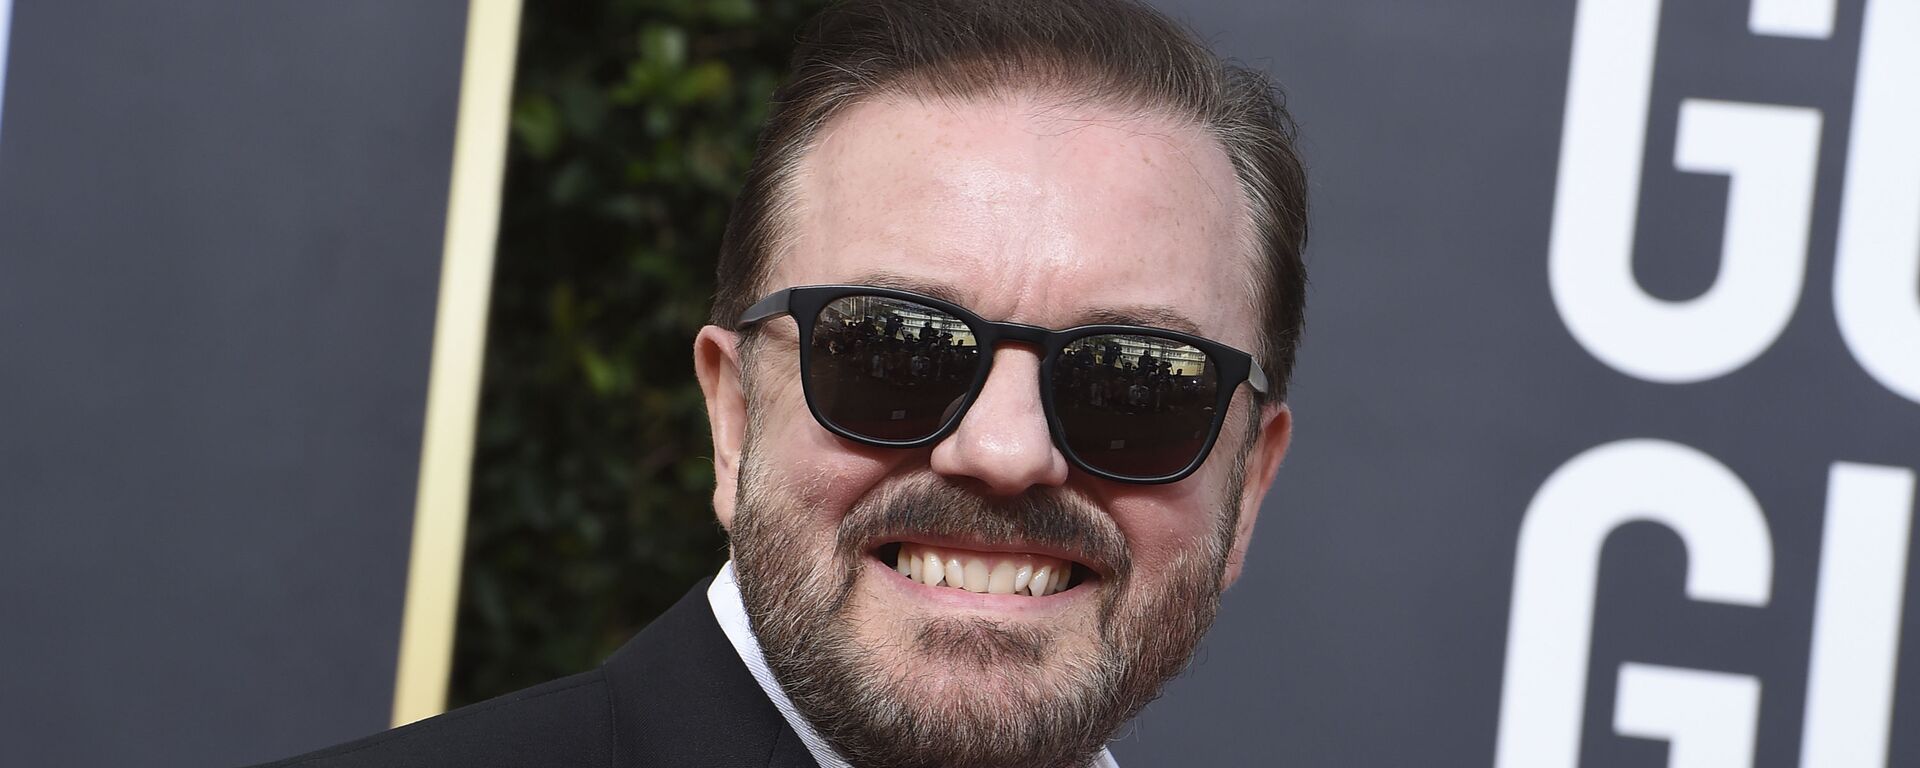 Ricky Gervais arrives at the 77th annual Golden Globe Awards at the Beverly Hilton Hotel on Sunday, Jan. 5, 2020, in Beverly Hills, Calif.  - Sputnik International, 1920, 20.10.2021